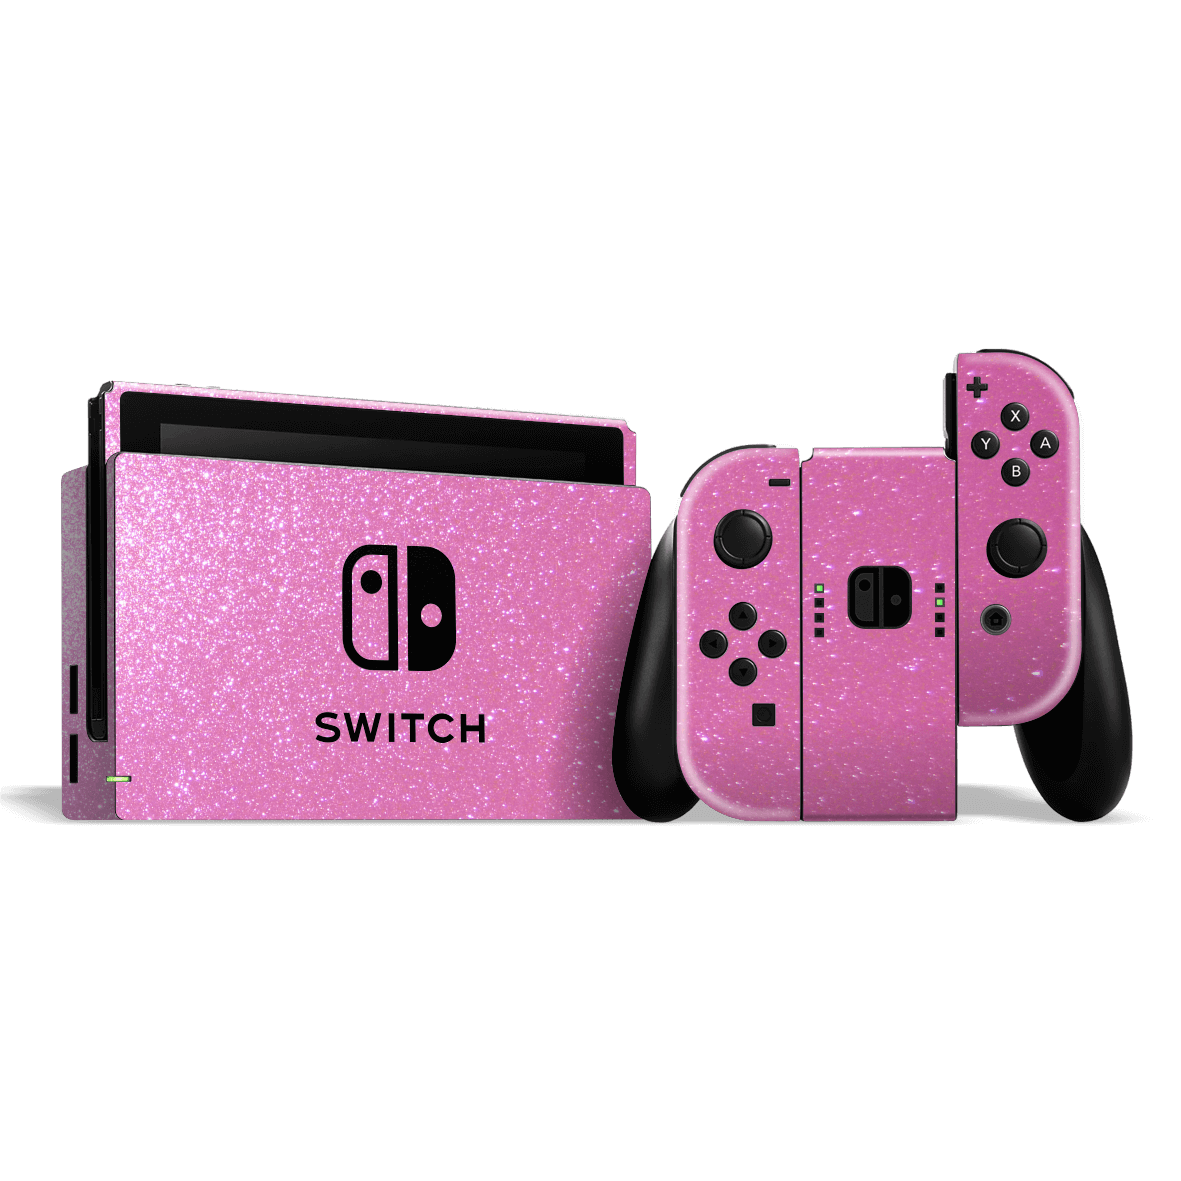 Nintendo SWITCH Diamond Pink Glitter Shimmering Skin Wrap Sticker Decal Cover Protector by EasySkinz